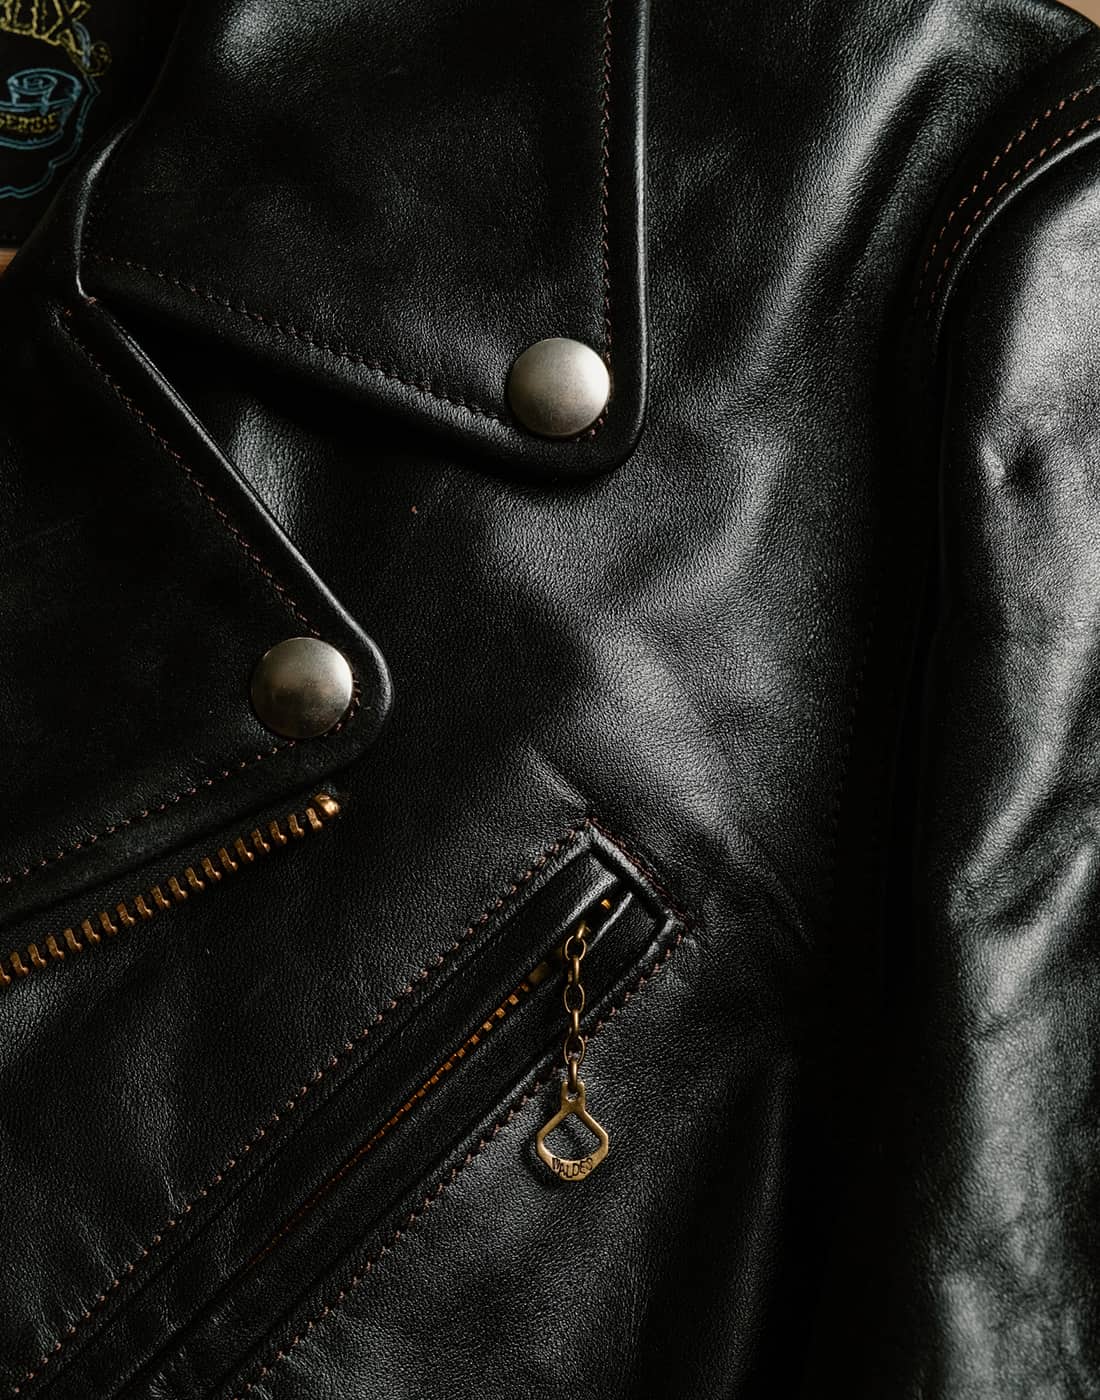 Closeup of a leather jacket showing texture and details